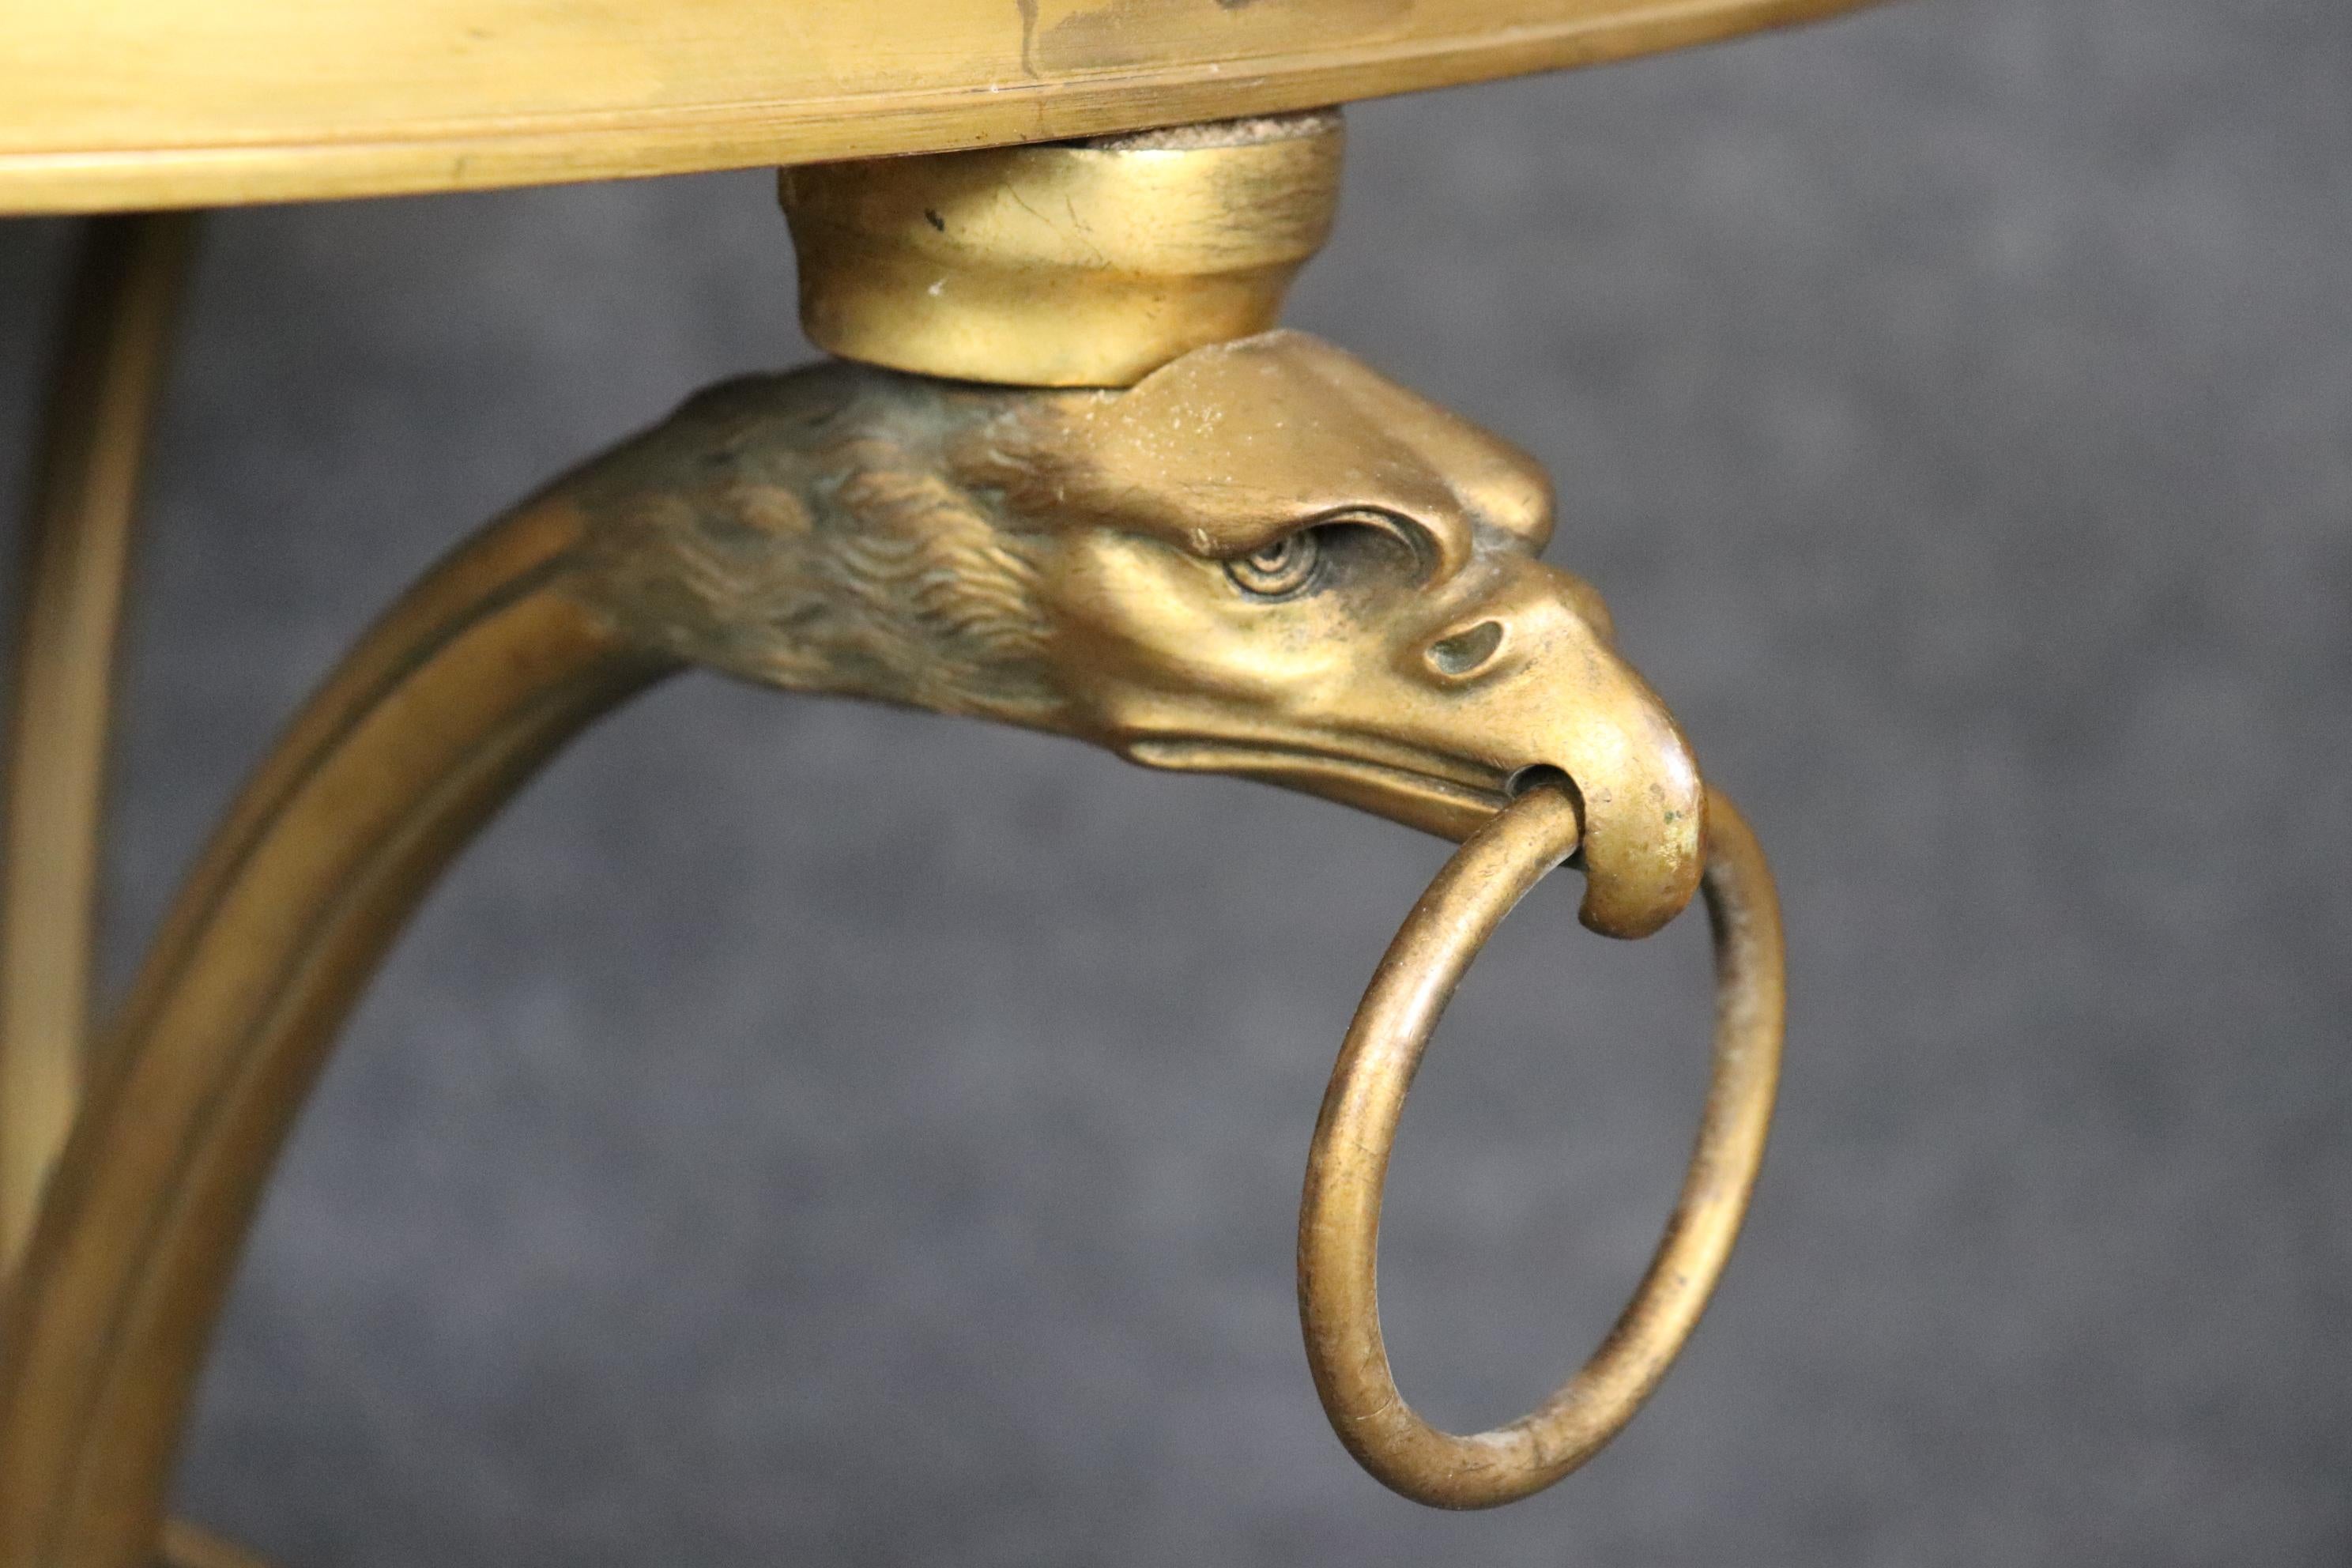 This is a fine pair of bronze eagle head and ring Directoire or Regency style French gueridons. The gueridons are made of heavy solid bronze or possibly brass though we think they are bronze. The tables feature gorgeous castings of eagles wih rings